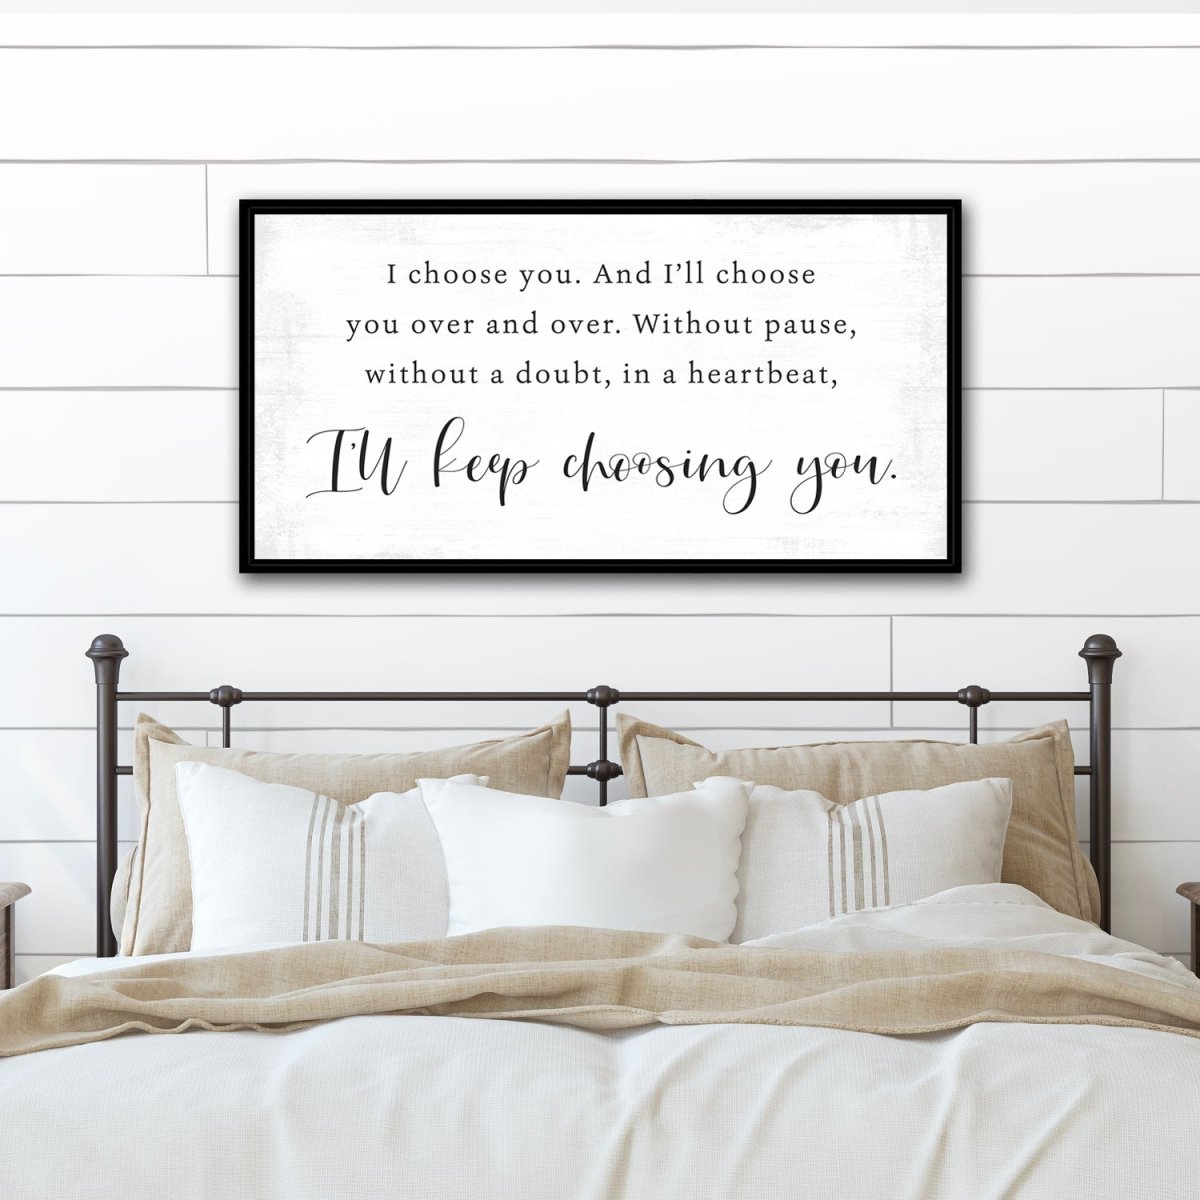 I Choose You Wall Art in Master Bedroom Above Bed - Pretty Perfect Studio